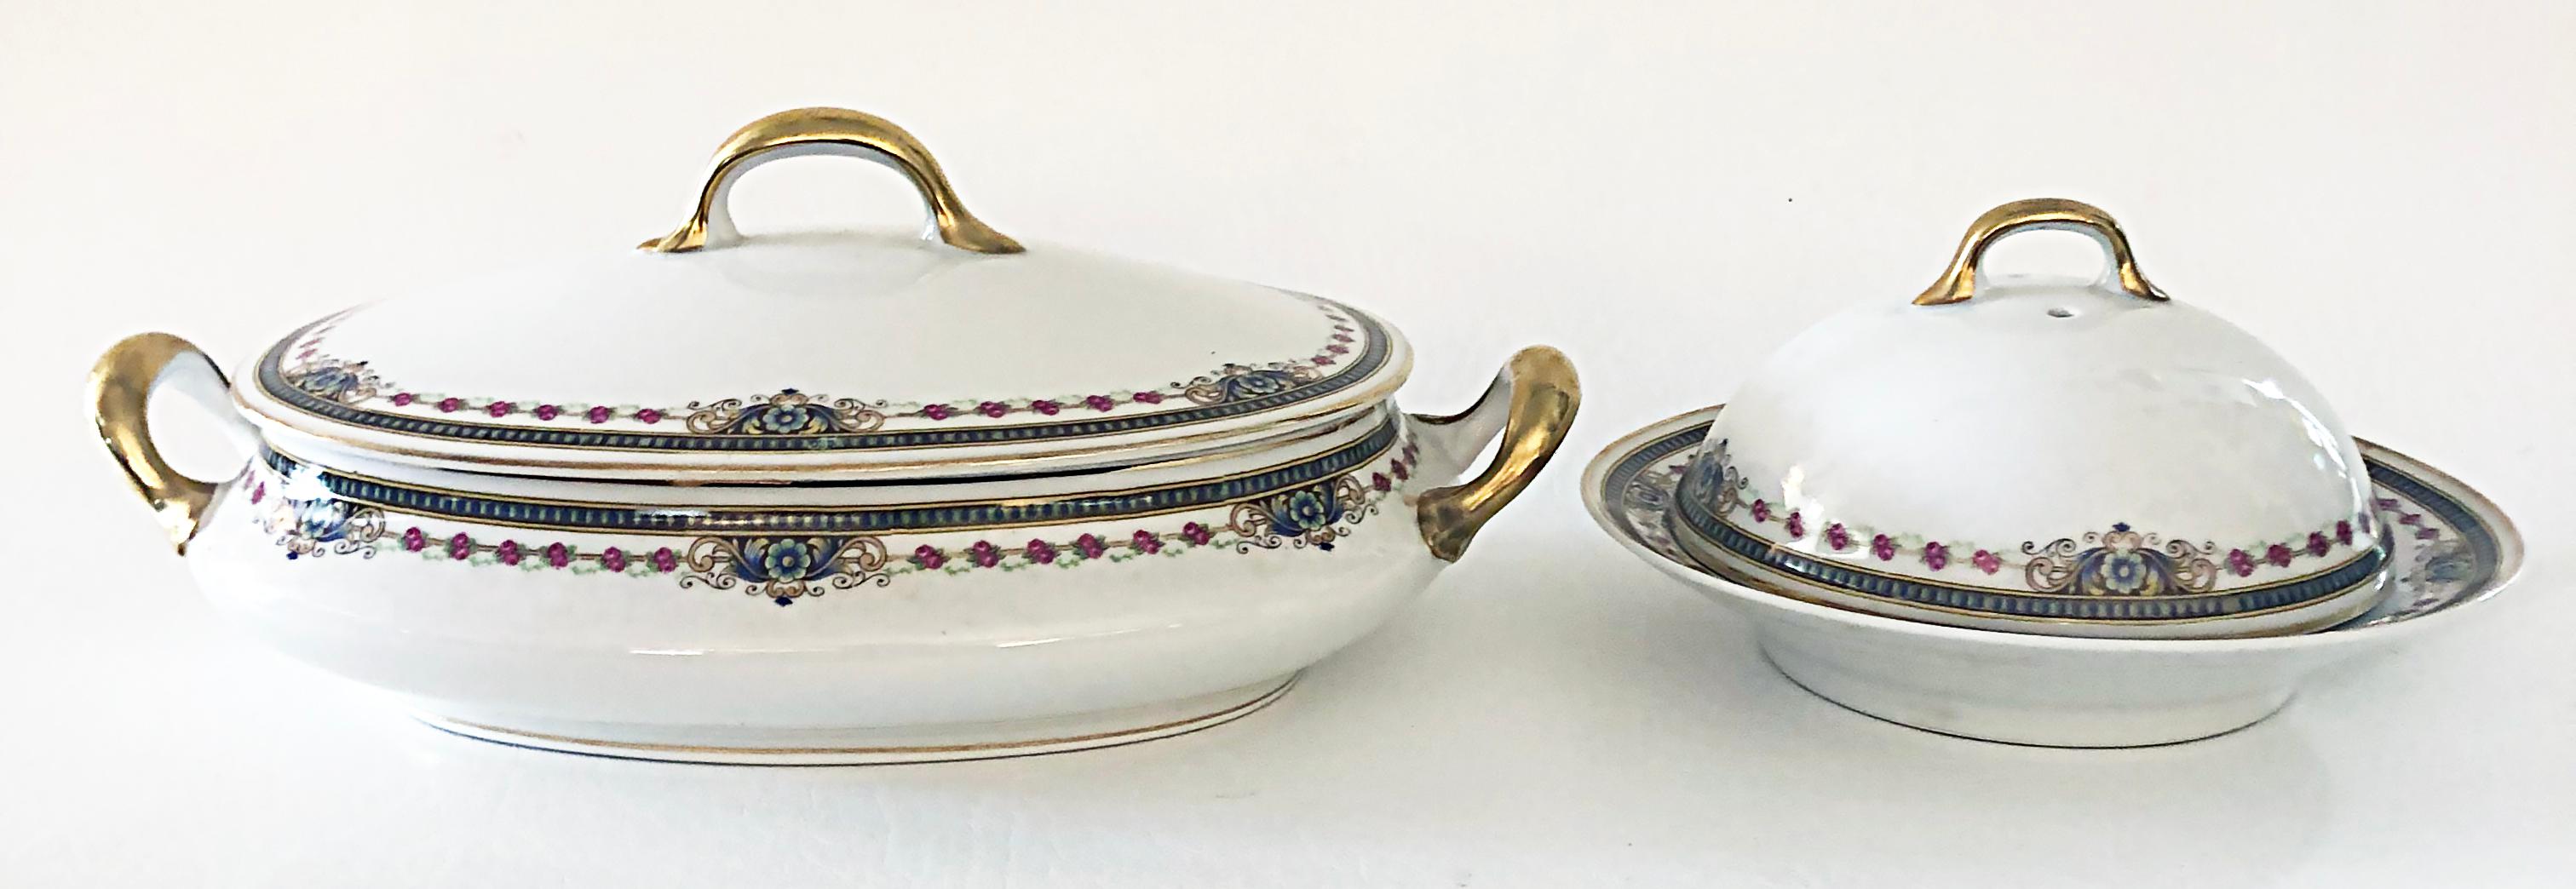 French Limoges France L. Bernardaud Porcelain Tureen & Cheese Keep with Covers For Sale